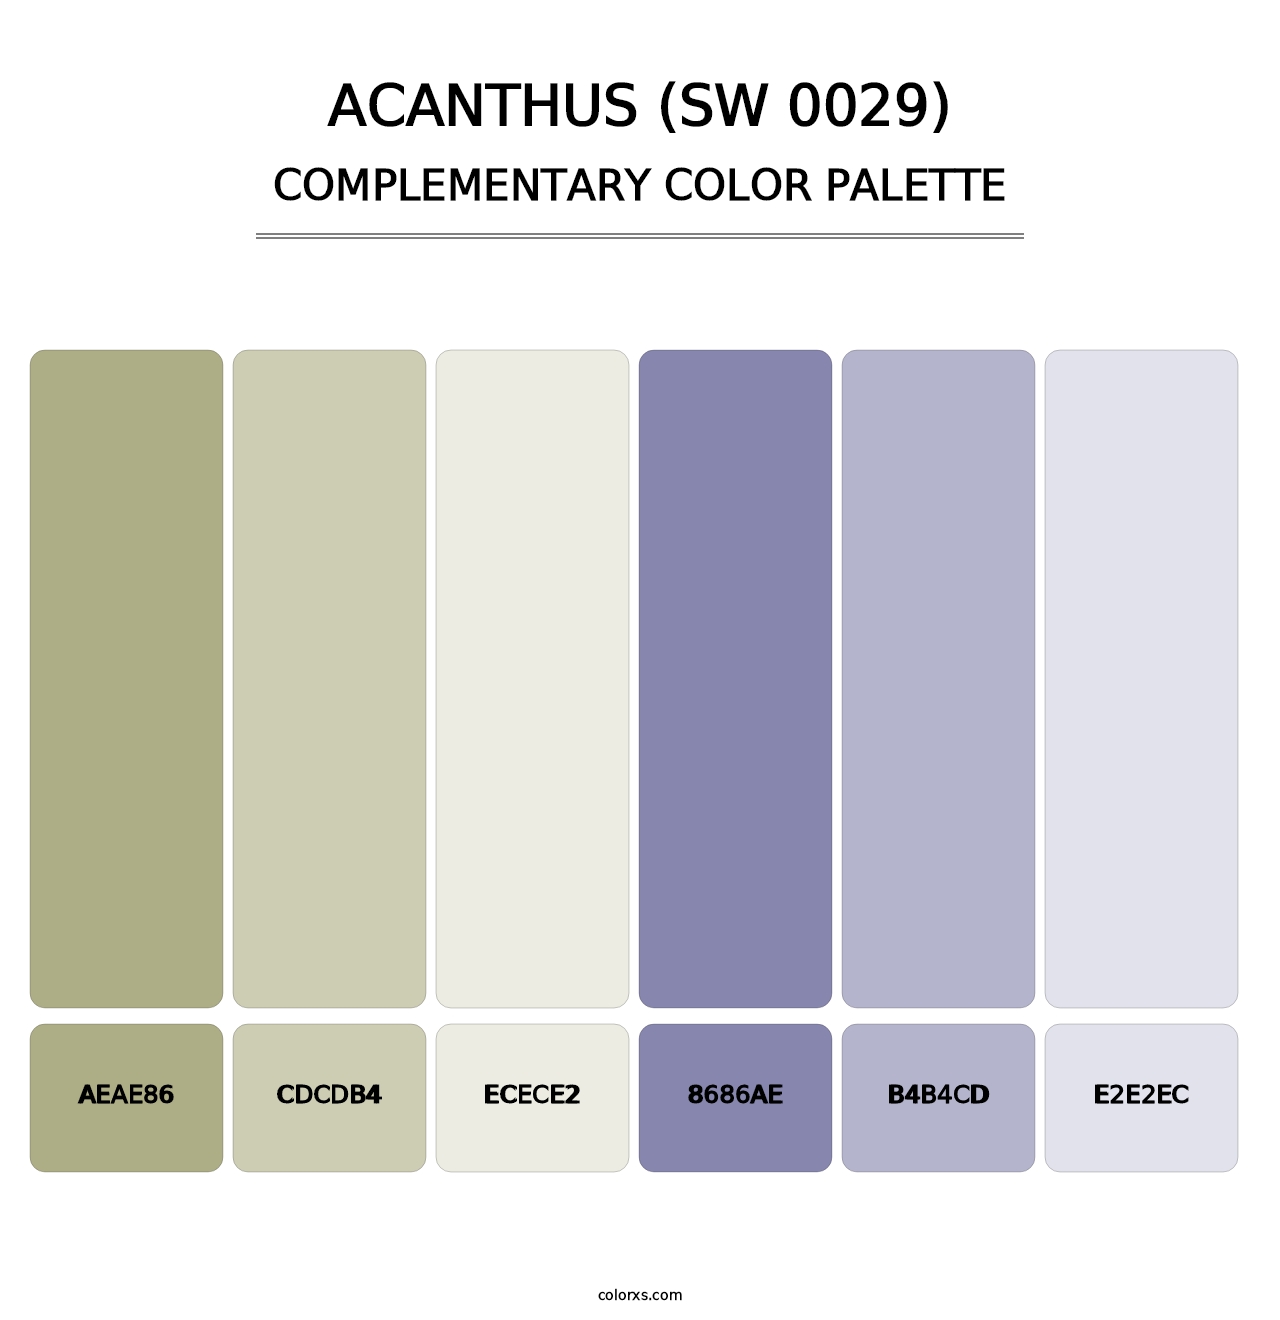 Acanthus (SW 0029) - Complementary Color Palette